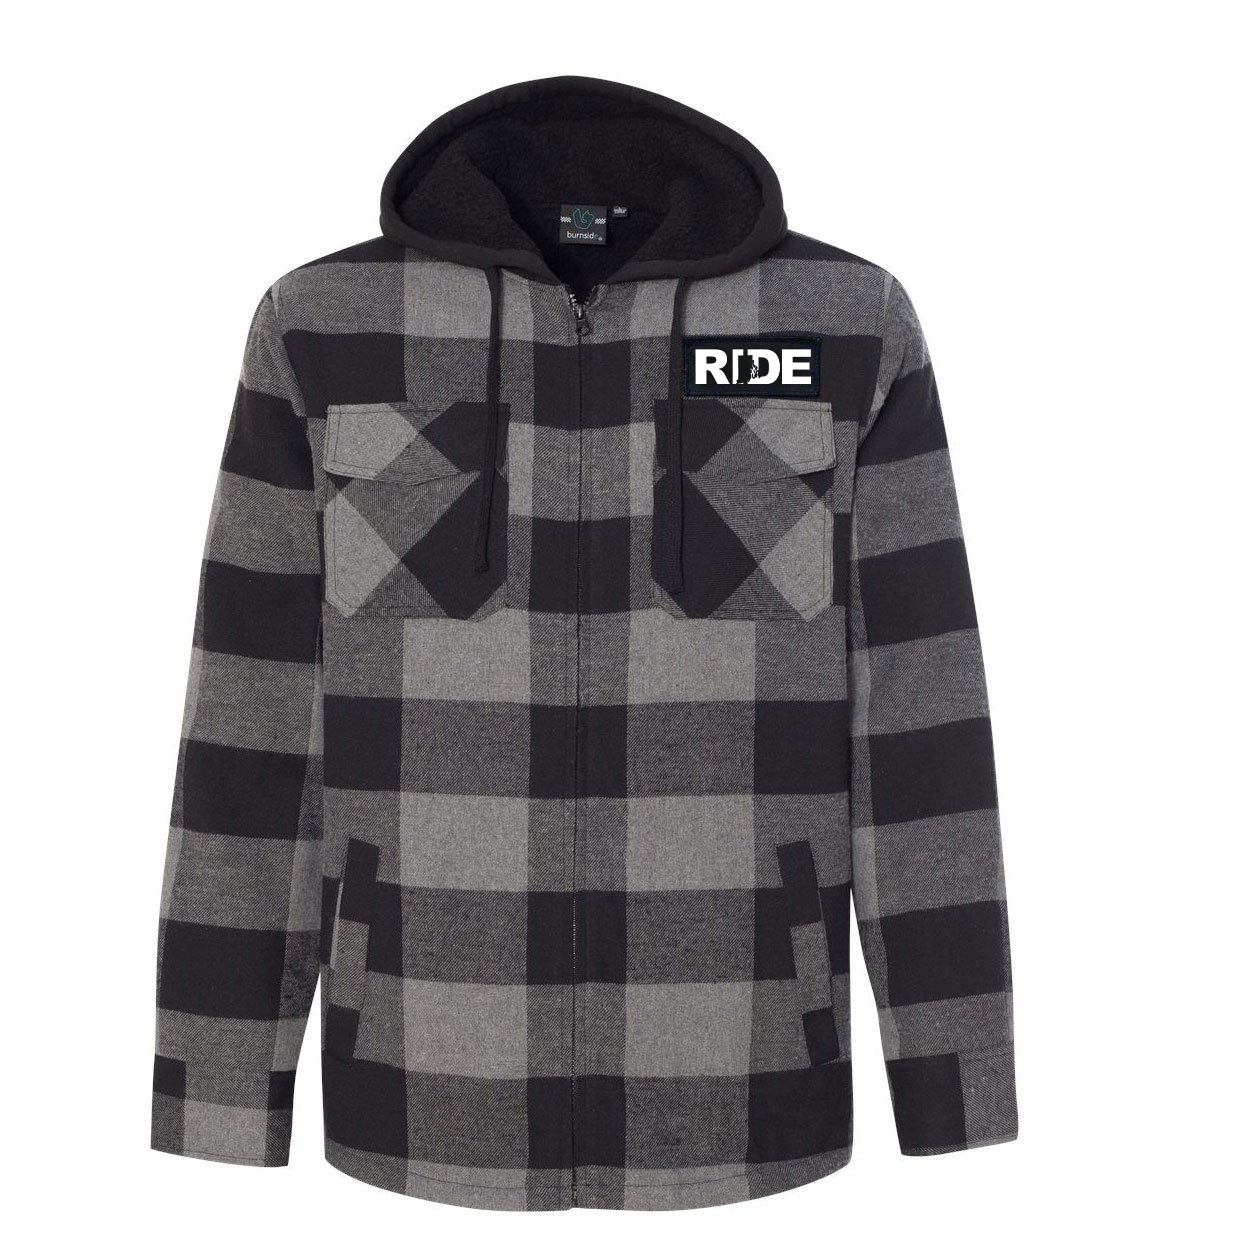 Ride Rhode Island Classic Unisex Full Zip Woven Patch Hooded Flannel Jacket Black/Gray (White Logo)